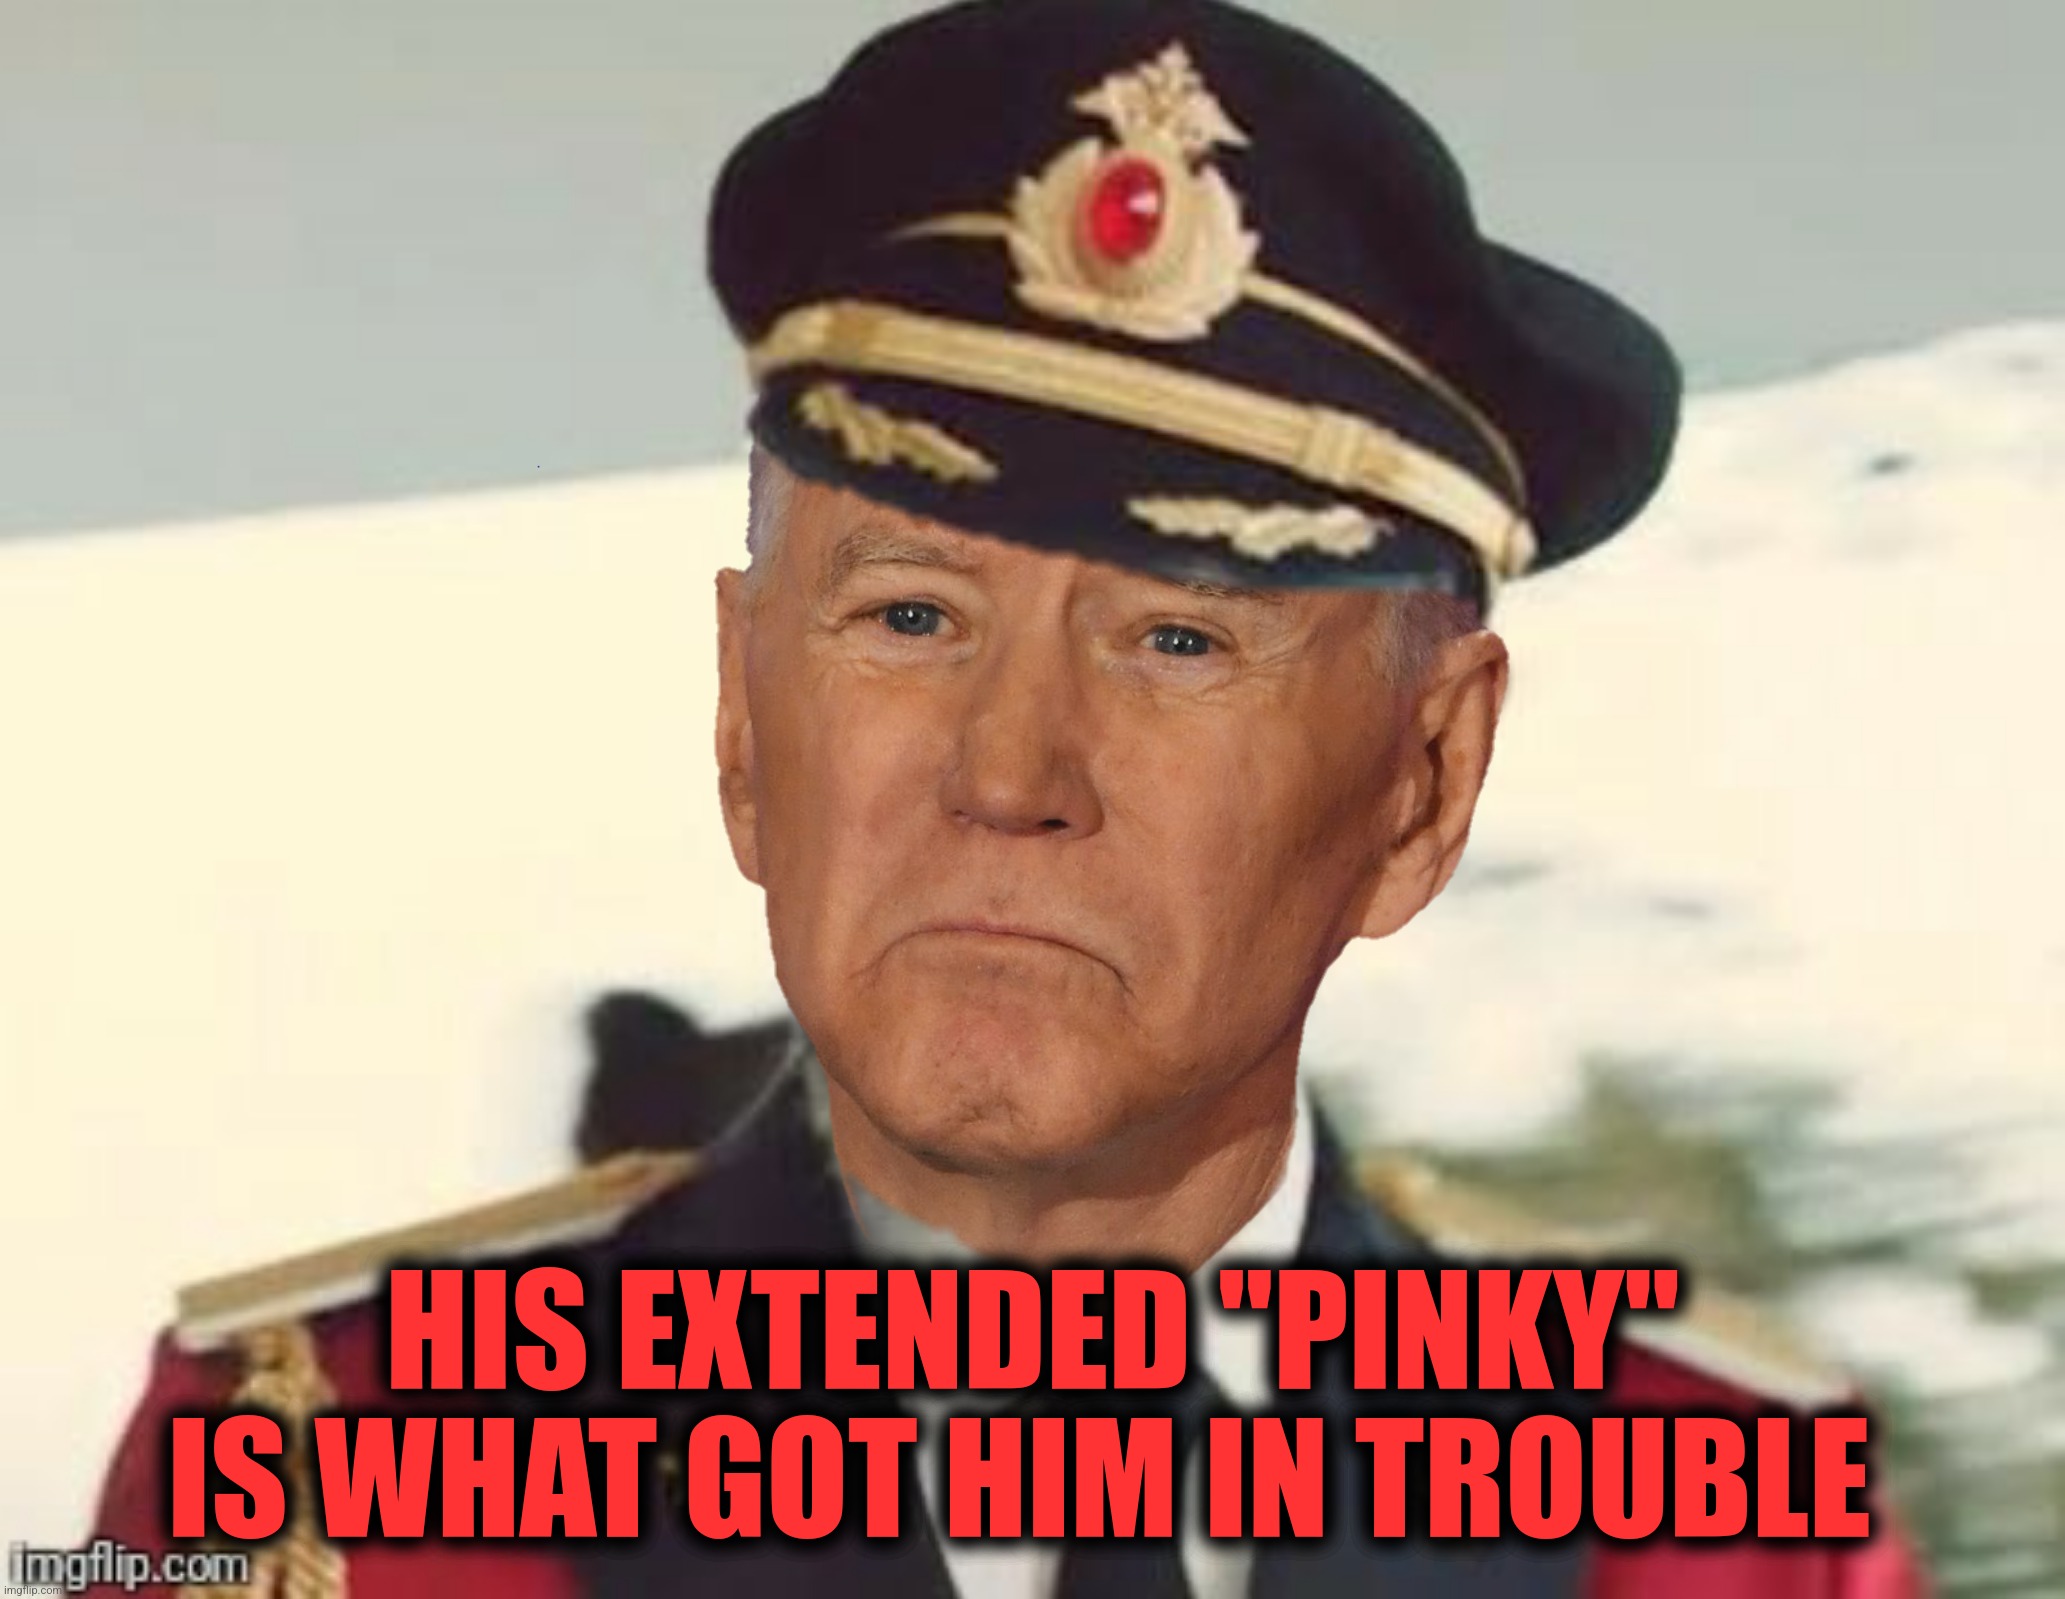 HIS EXTENDED "PINKY" IS WHAT GOT HIM IN TROUBLE | made w/ Imgflip meme maker